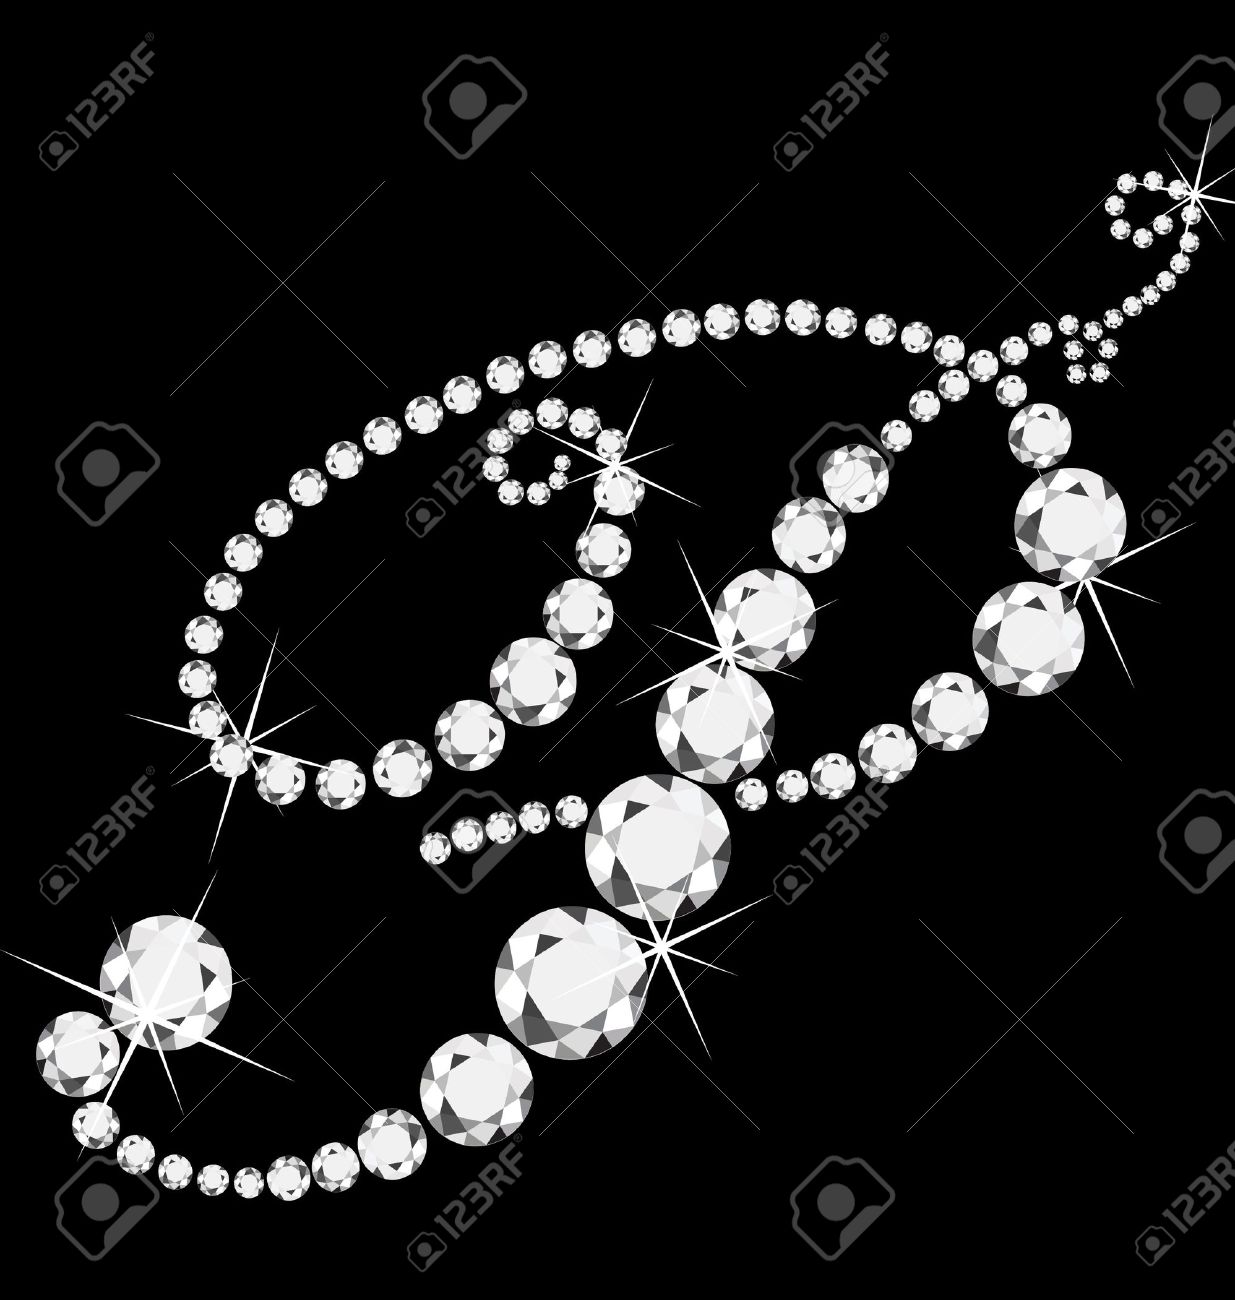 a word wallpaper download,jewellery,fashion accessory,black and white,pearl,font